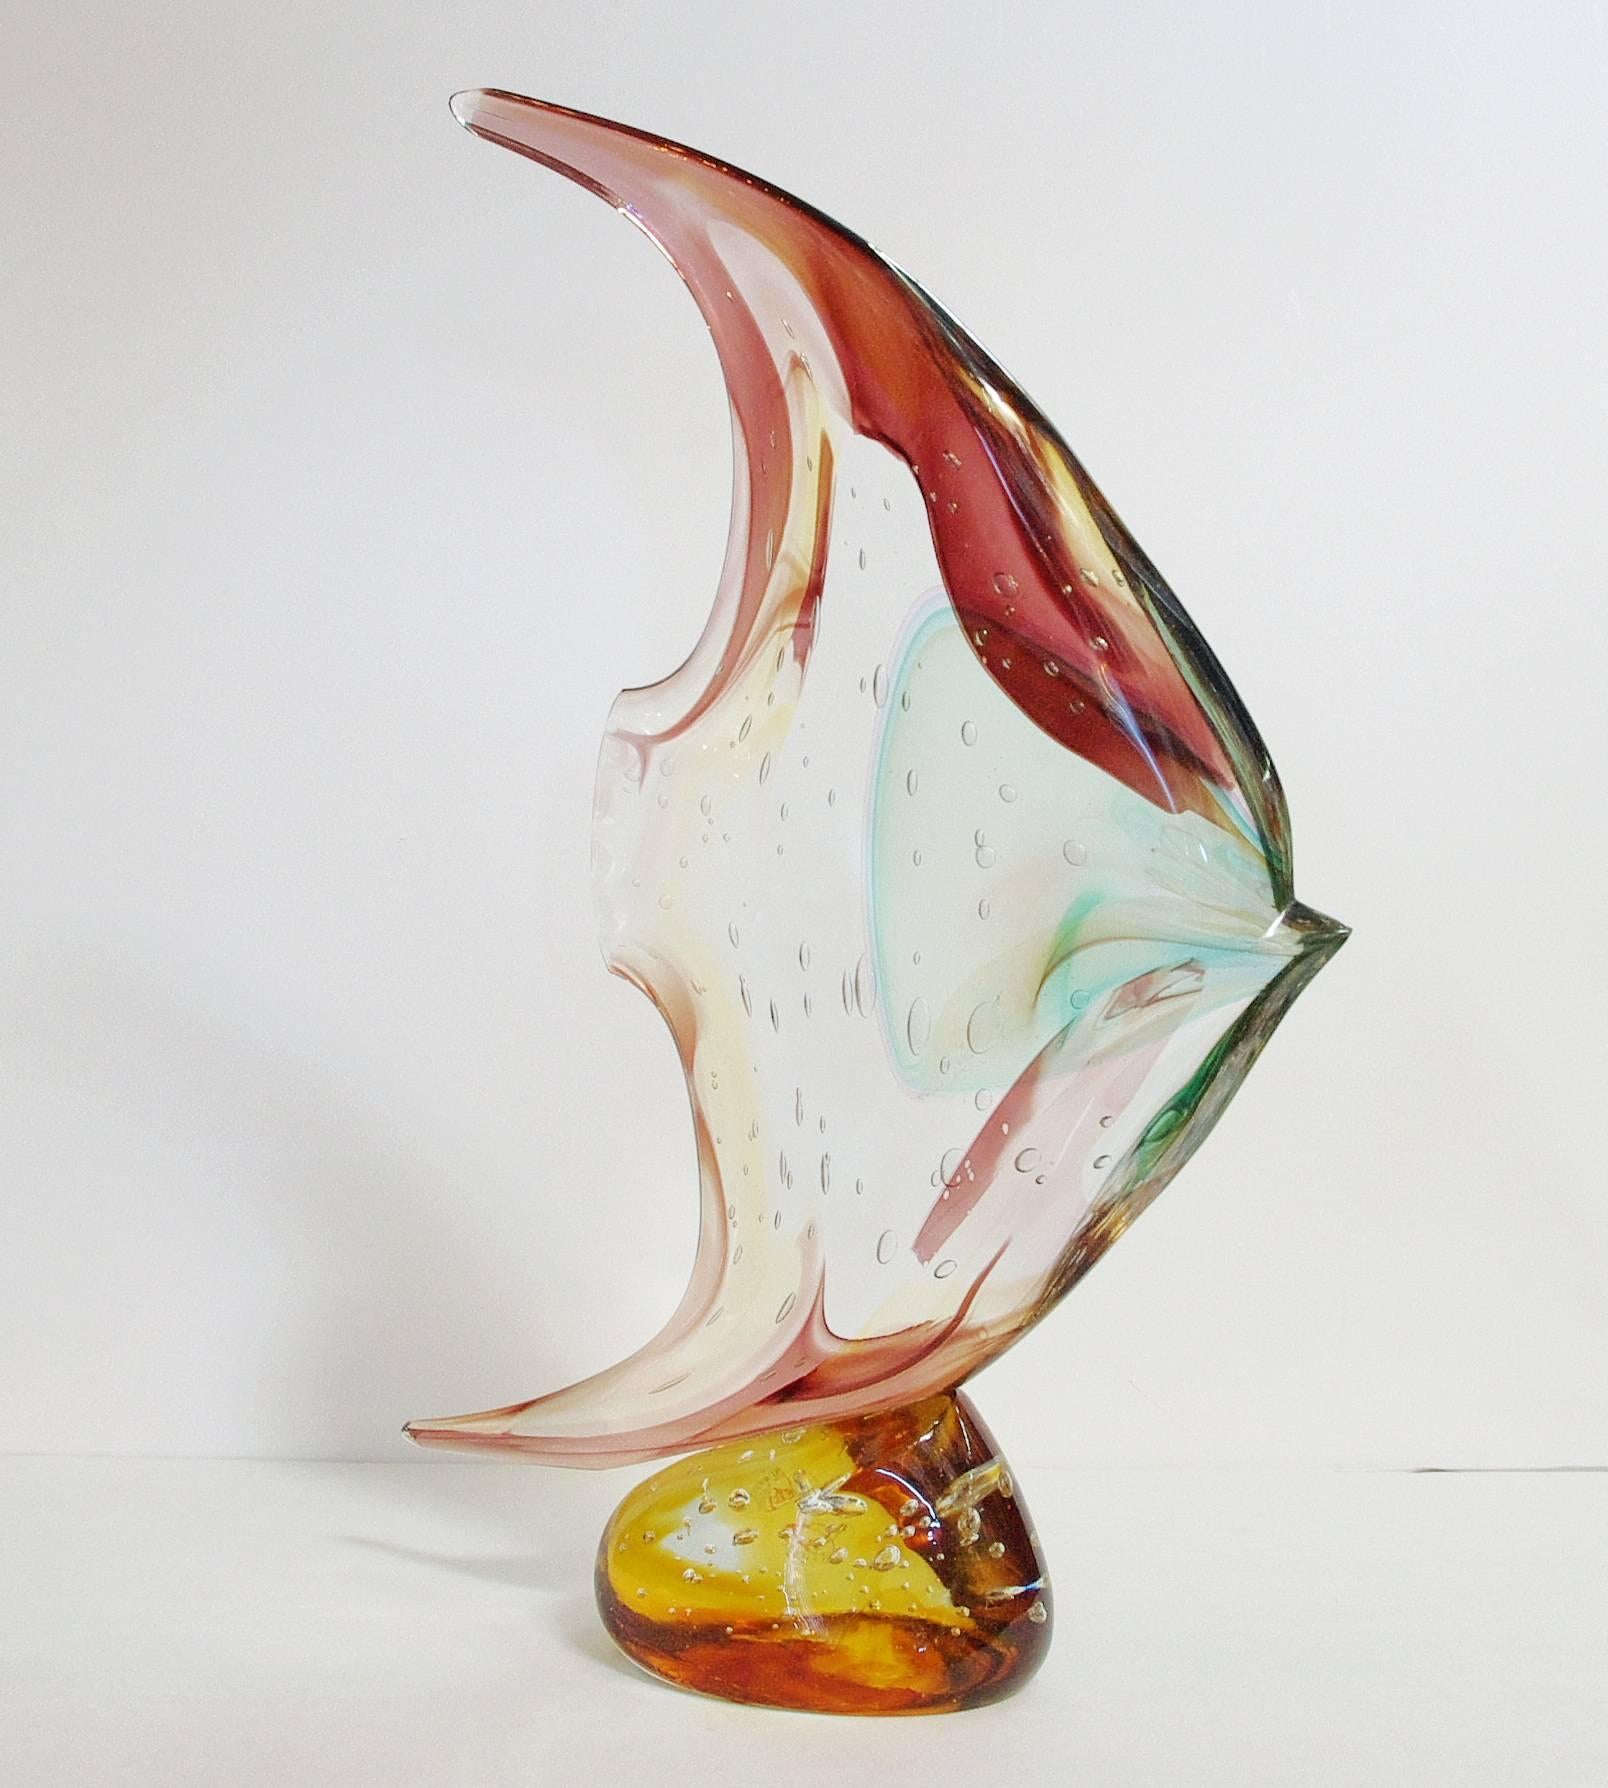 Italian Murano glass fish on pebble sculpture, hand blown and crafted in multiple colors of Murano glass by Sergio Constantini 
Signed “Constantini S.” on the base / Made in Italy in the 1980’s 
Height: 20 inches / Width: 14 inches / Depth: 4 inches